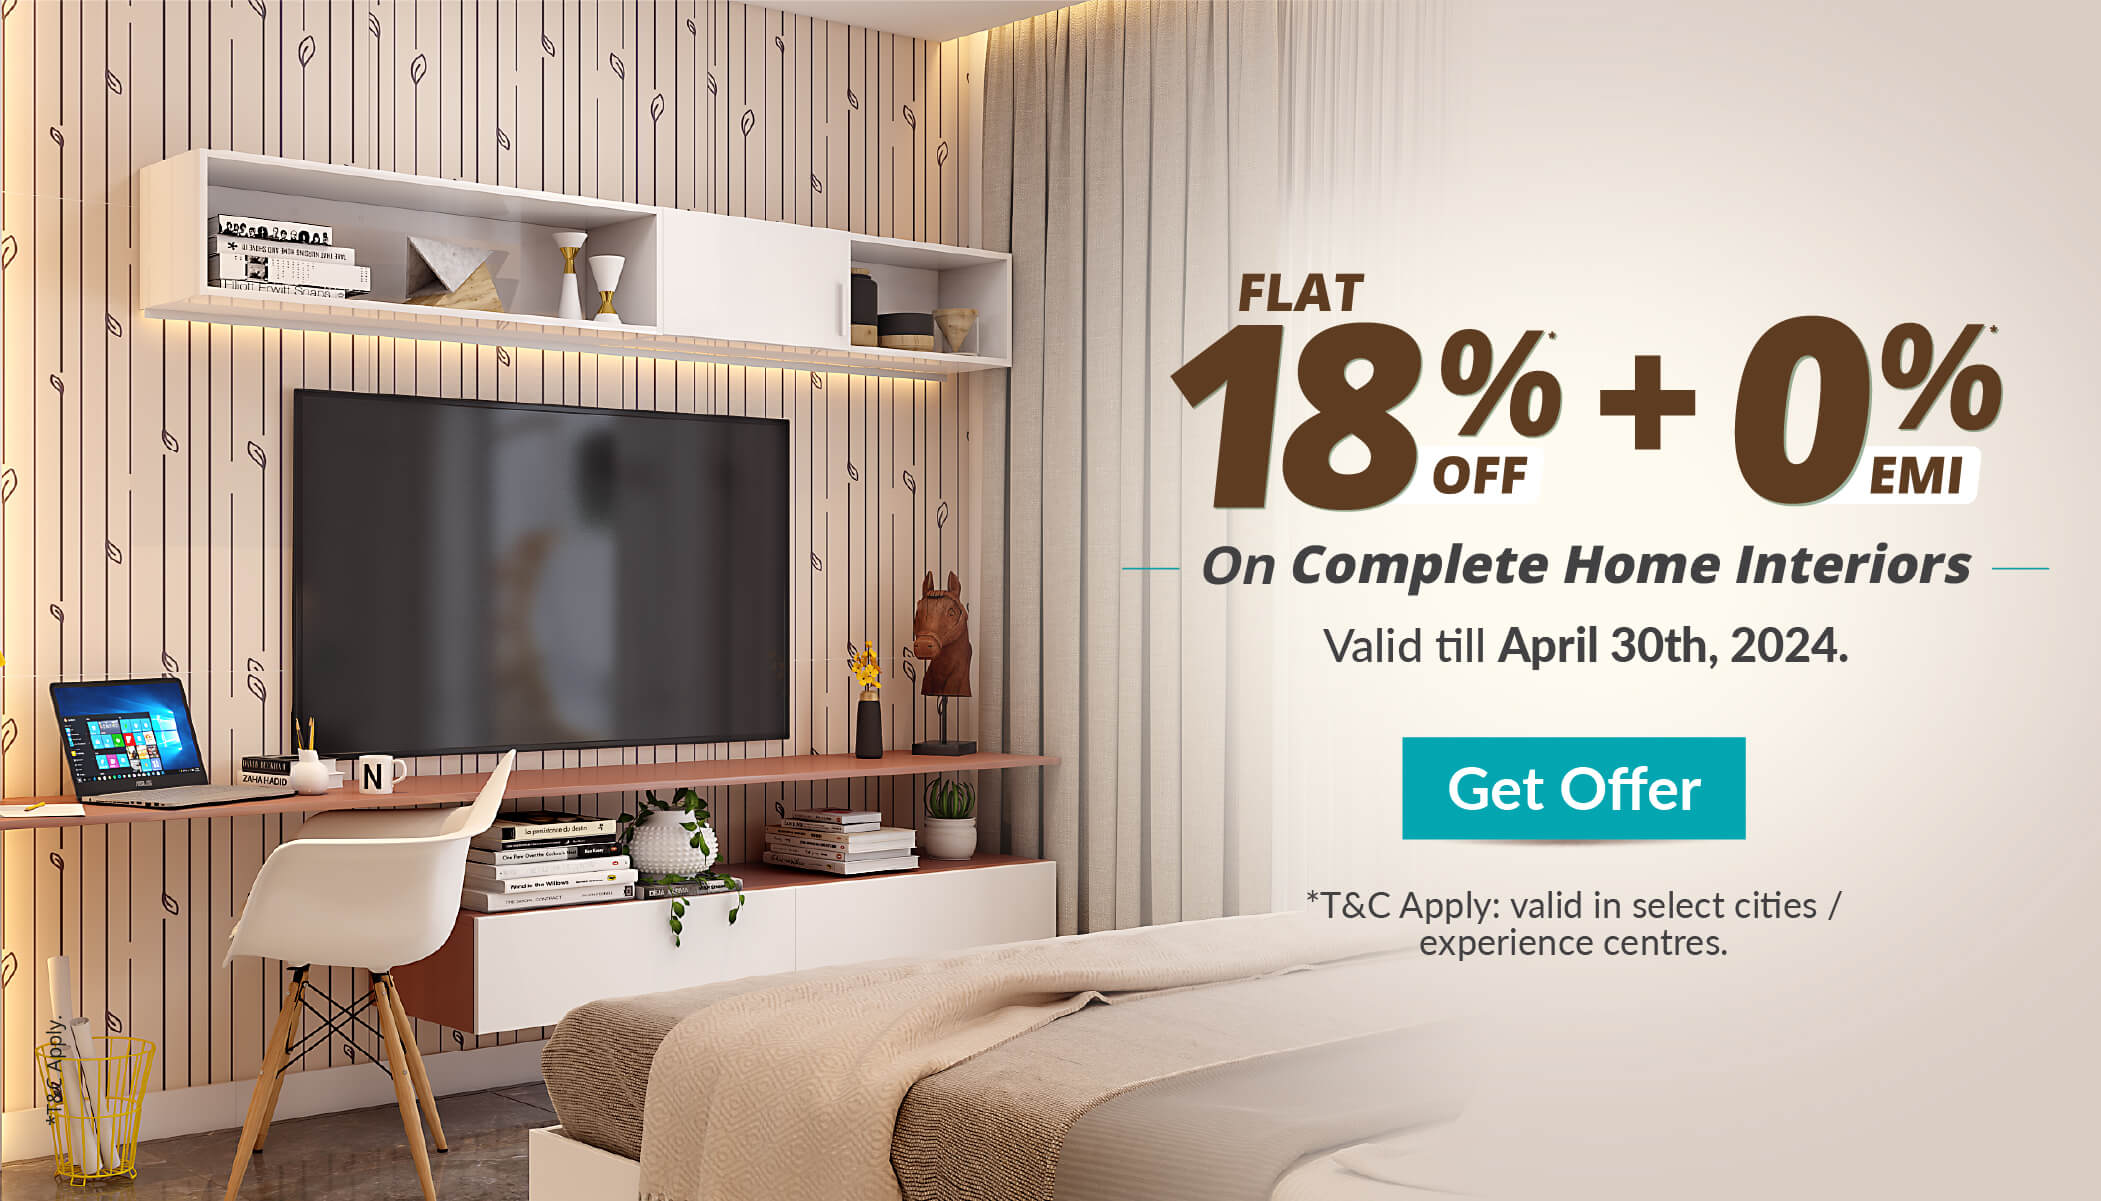 Home interiors offered by DesignCafe: 18% flat discount + 0% EMI